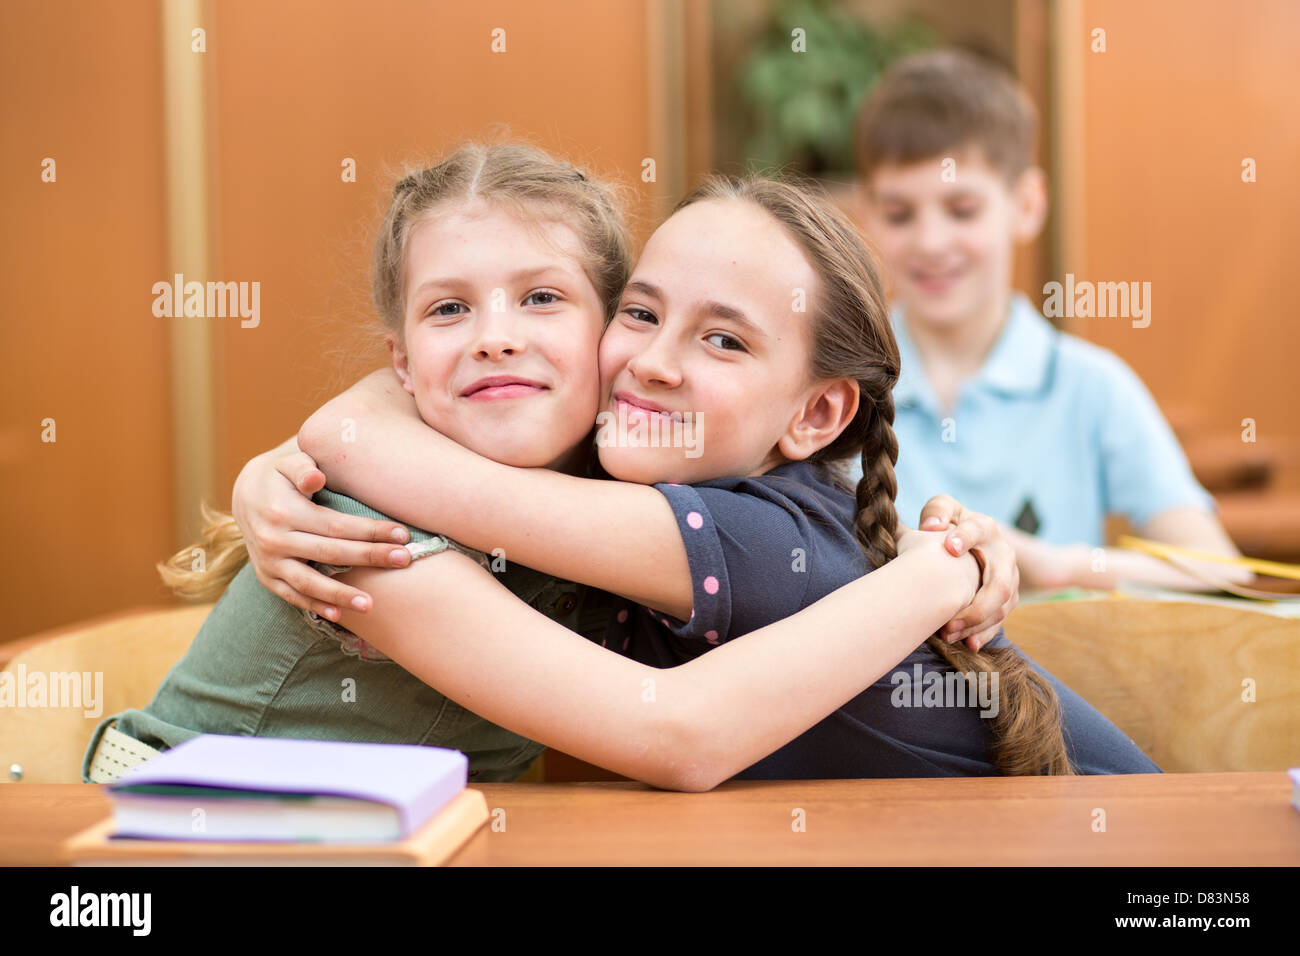 schoolgirls friends after lesson Stock Photo